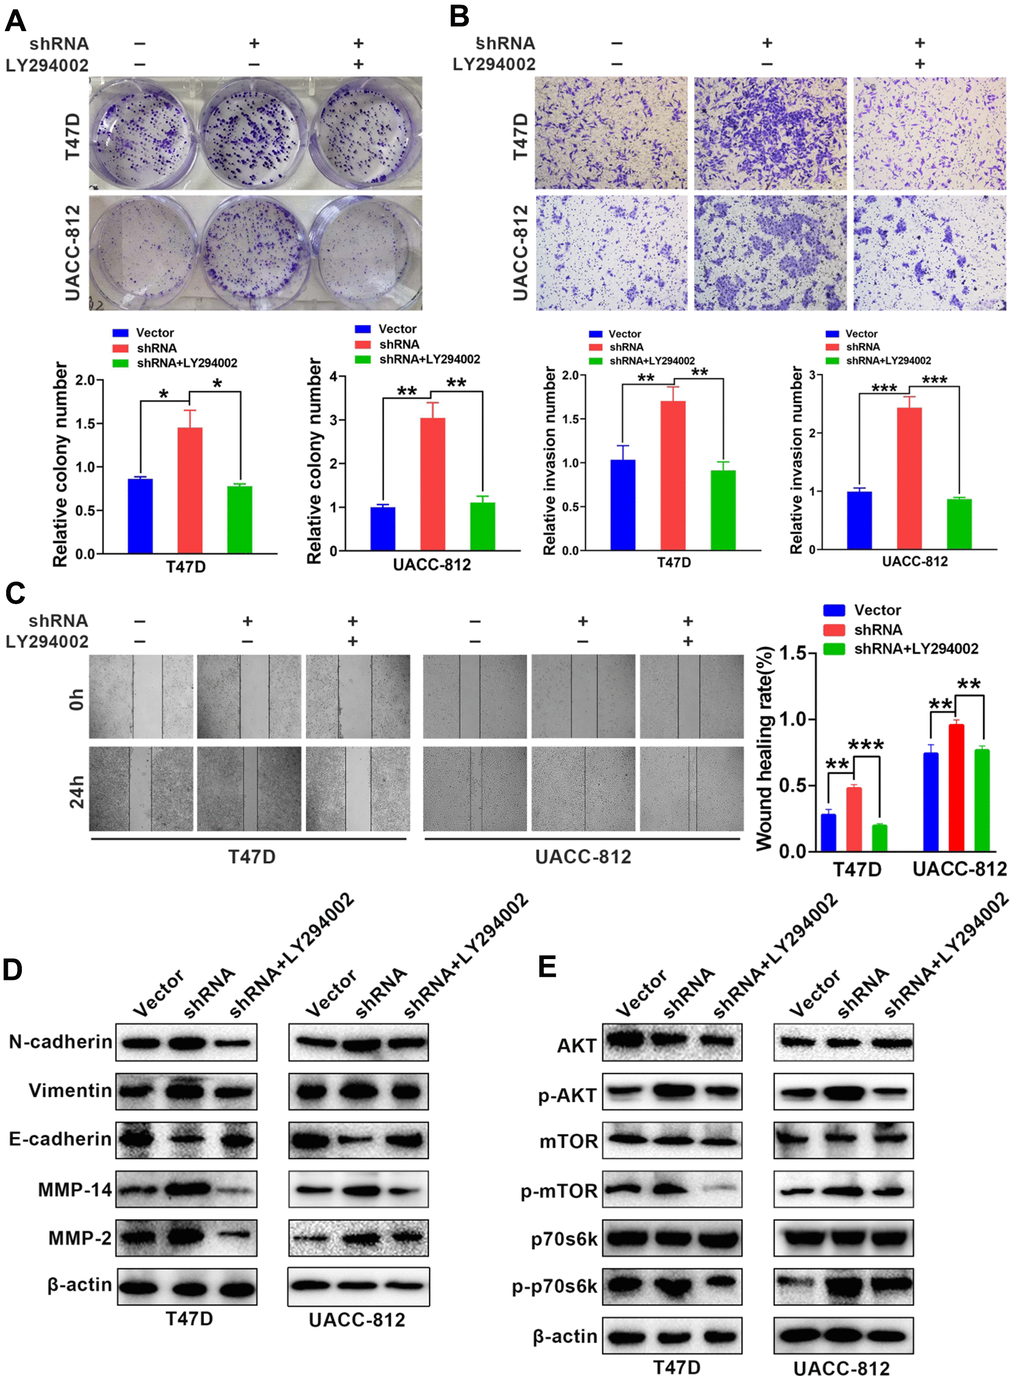 LY-294002 (AKT pathway inhibitor) reverses GABARAP-inhibited proliferation, invasion, migration and EMT. (A) Colony-forming efficiency was assessed in T47D-Vector, T47D-shRNA, T47D-shRNA cells incubated with LY-294002, UACC-812-vector, UACC-812-shRNA, and UACC-812-shRNA cells incubated with LY-294002. P values were calculated using Student’s t-test. (B) Invasion assays were performed in the indicated cells. P values were calculated using Student’s t-test. (C) Migration assays were performed in the indicated cells. P values were calculated using Student’s t-test. (D) Western blot analyses were used to detect the expression levels of E-cadherin, N-cadherin, vimentin, MMP2 and MMP14 in the indicated cells. β-actin was used as an internal control. (E) Western blot analyses were used to detect the expression levels of p-AKT, AKT, p-mTOR, mTOR, p-p70s6k and p70s6k in the indicated cells. Cells were lysed using RIPA lysis buffer containing protease inhibitors and a phosphorylase inhibitor cocktail to obtain protein. β-actin was used as an internal control. Experiments were performed at least three times. The data are expressed as the mean ± SEM. P values were calculated using Student’s t-test. (*P P P P 